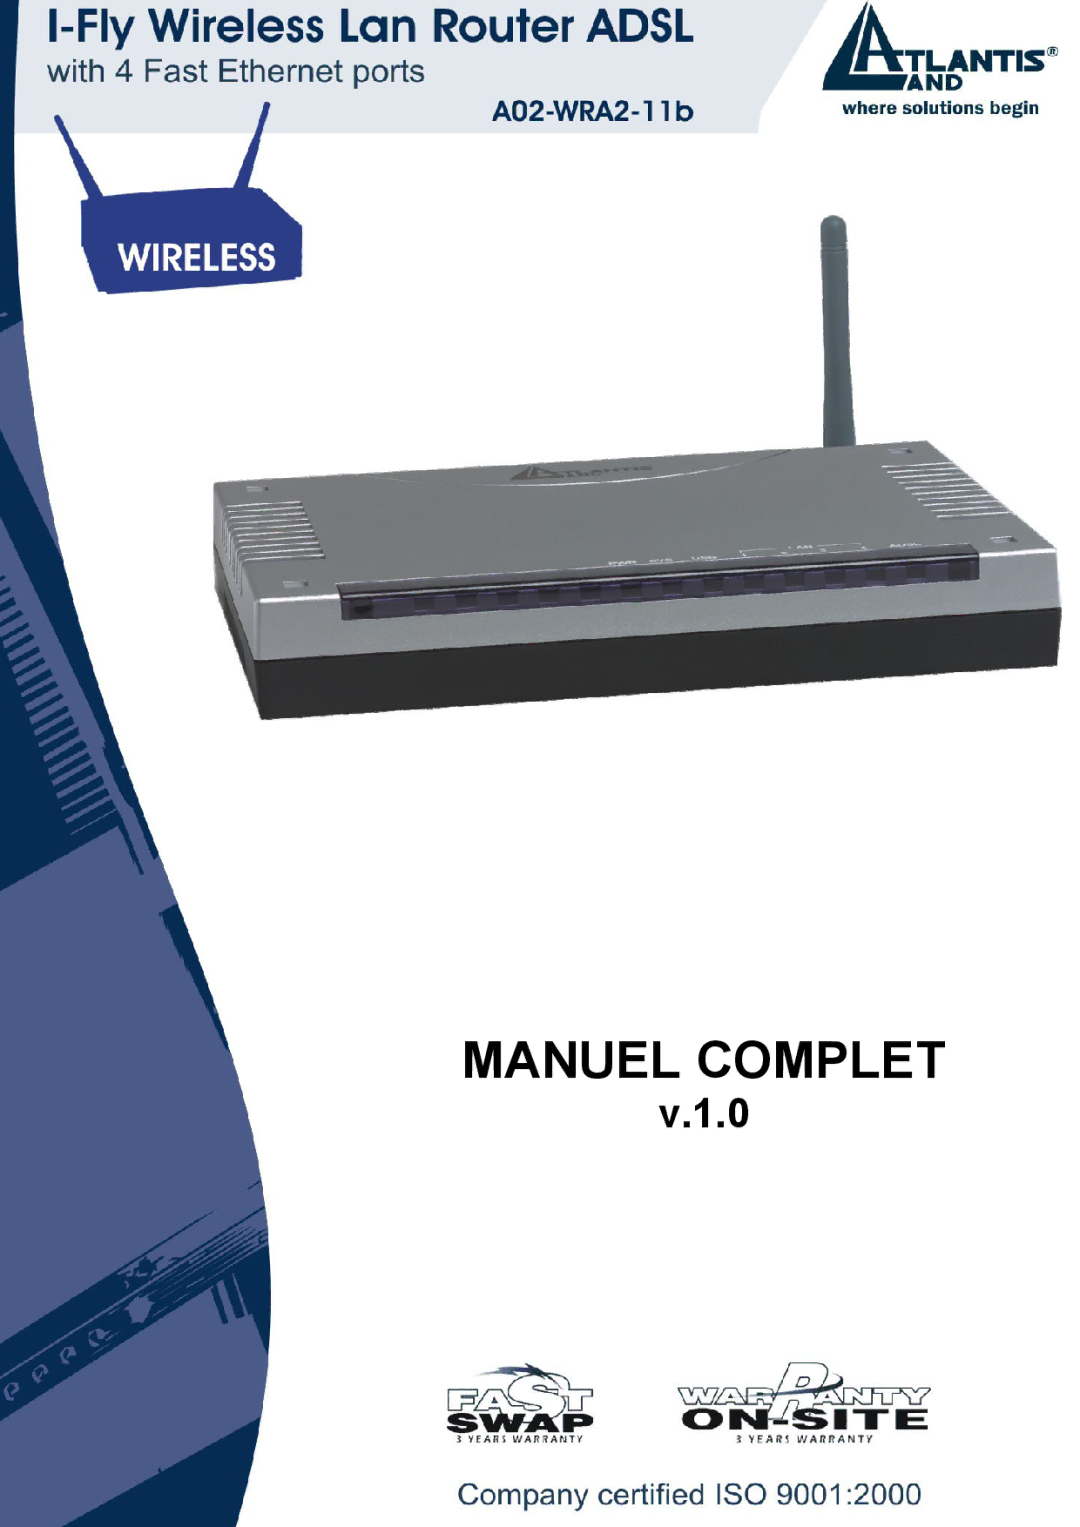 Bissell A02-WRA2-11B manual Manuel Complet 